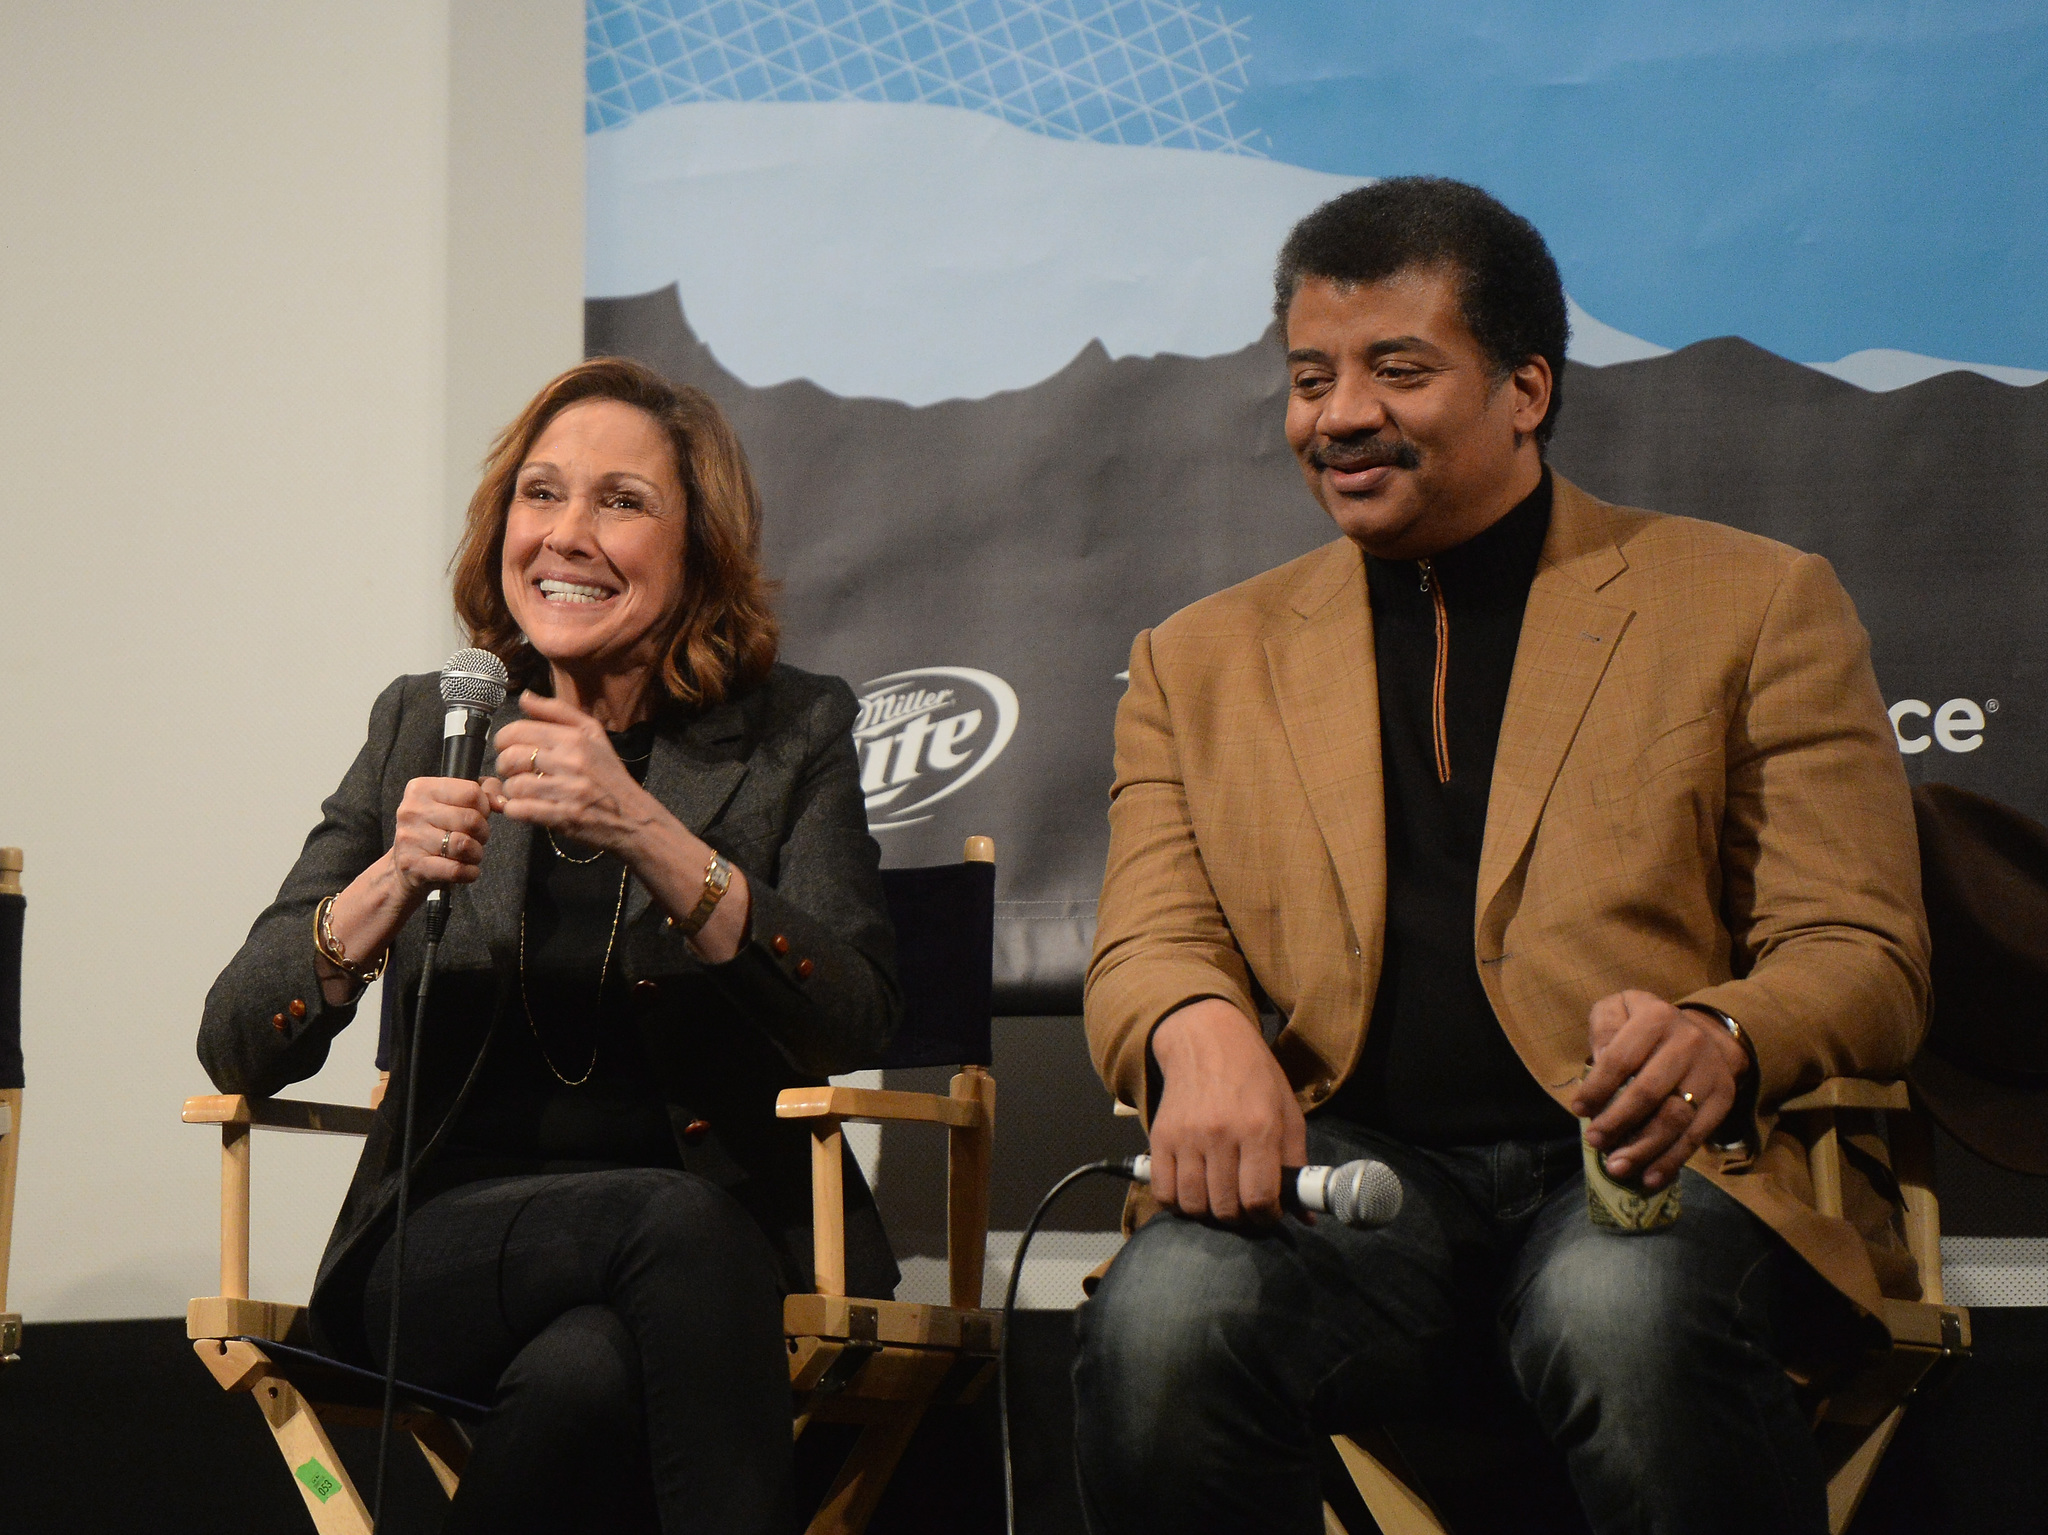 Ann Druyan and Neil deGrasse Tyson at event of Cosmos: A Spacetime Odyssey (2014)